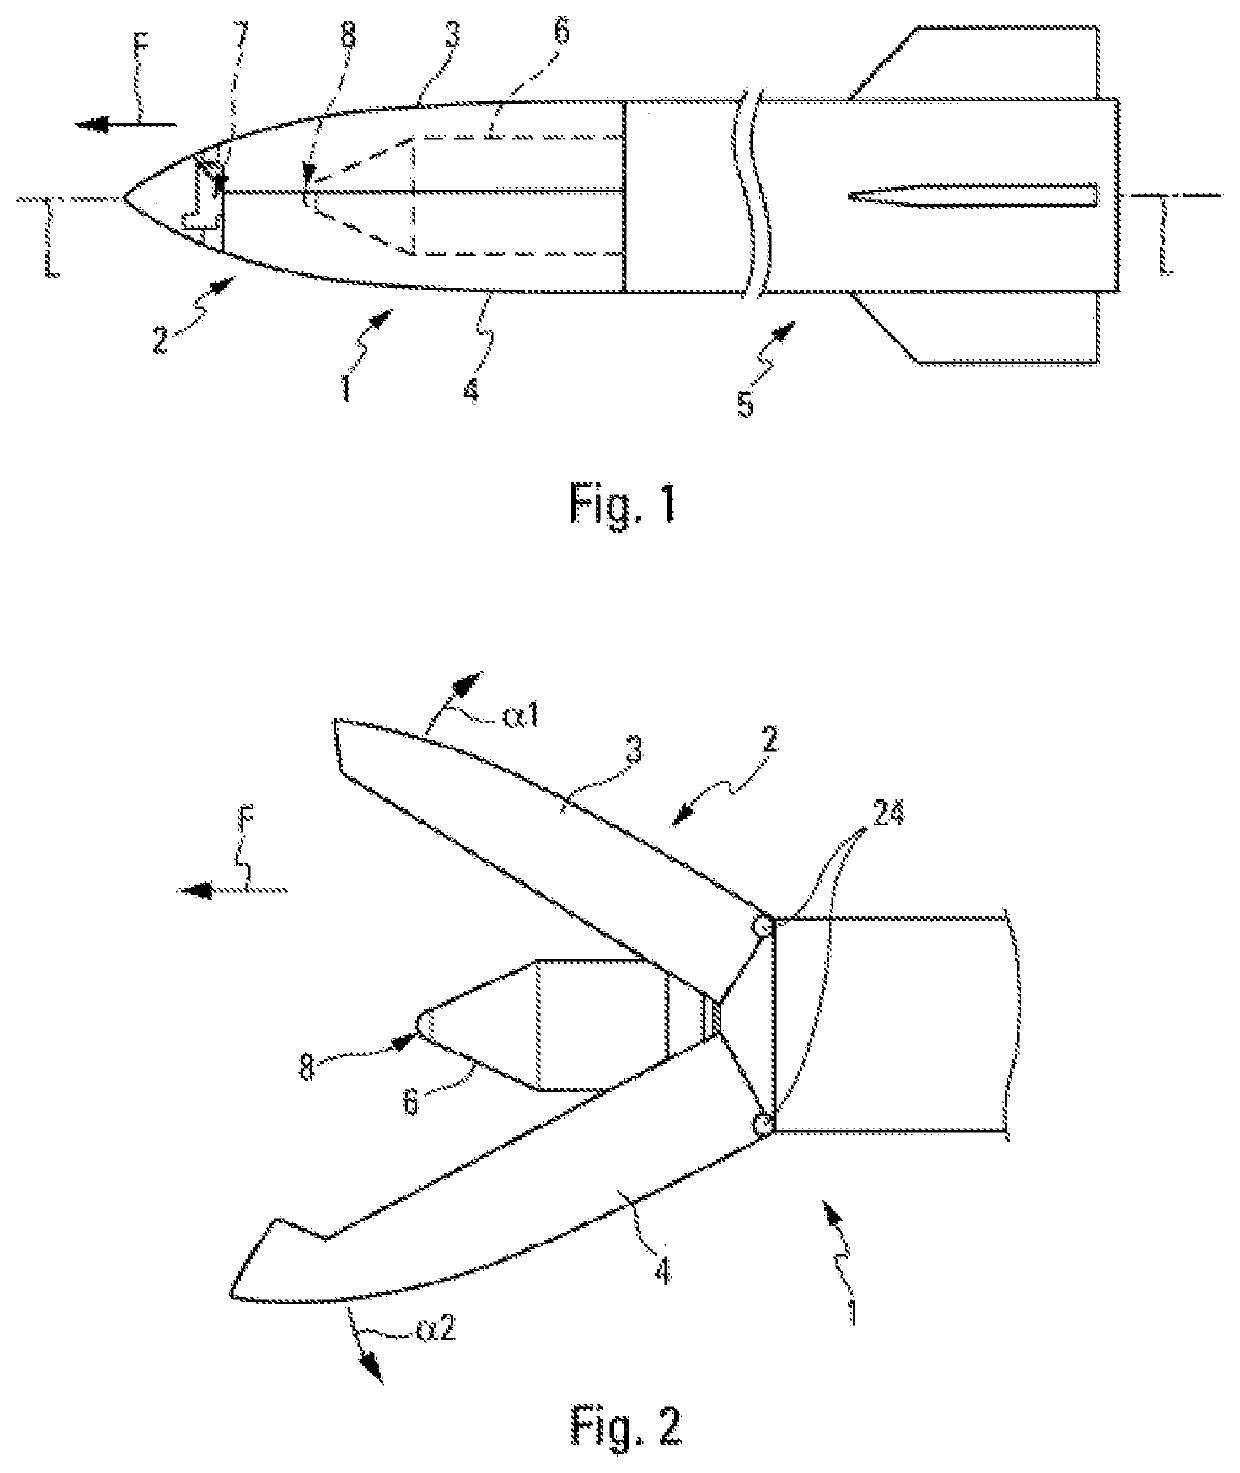 Actuation device for ejecting at least one removable part of a missile, particularly a nose